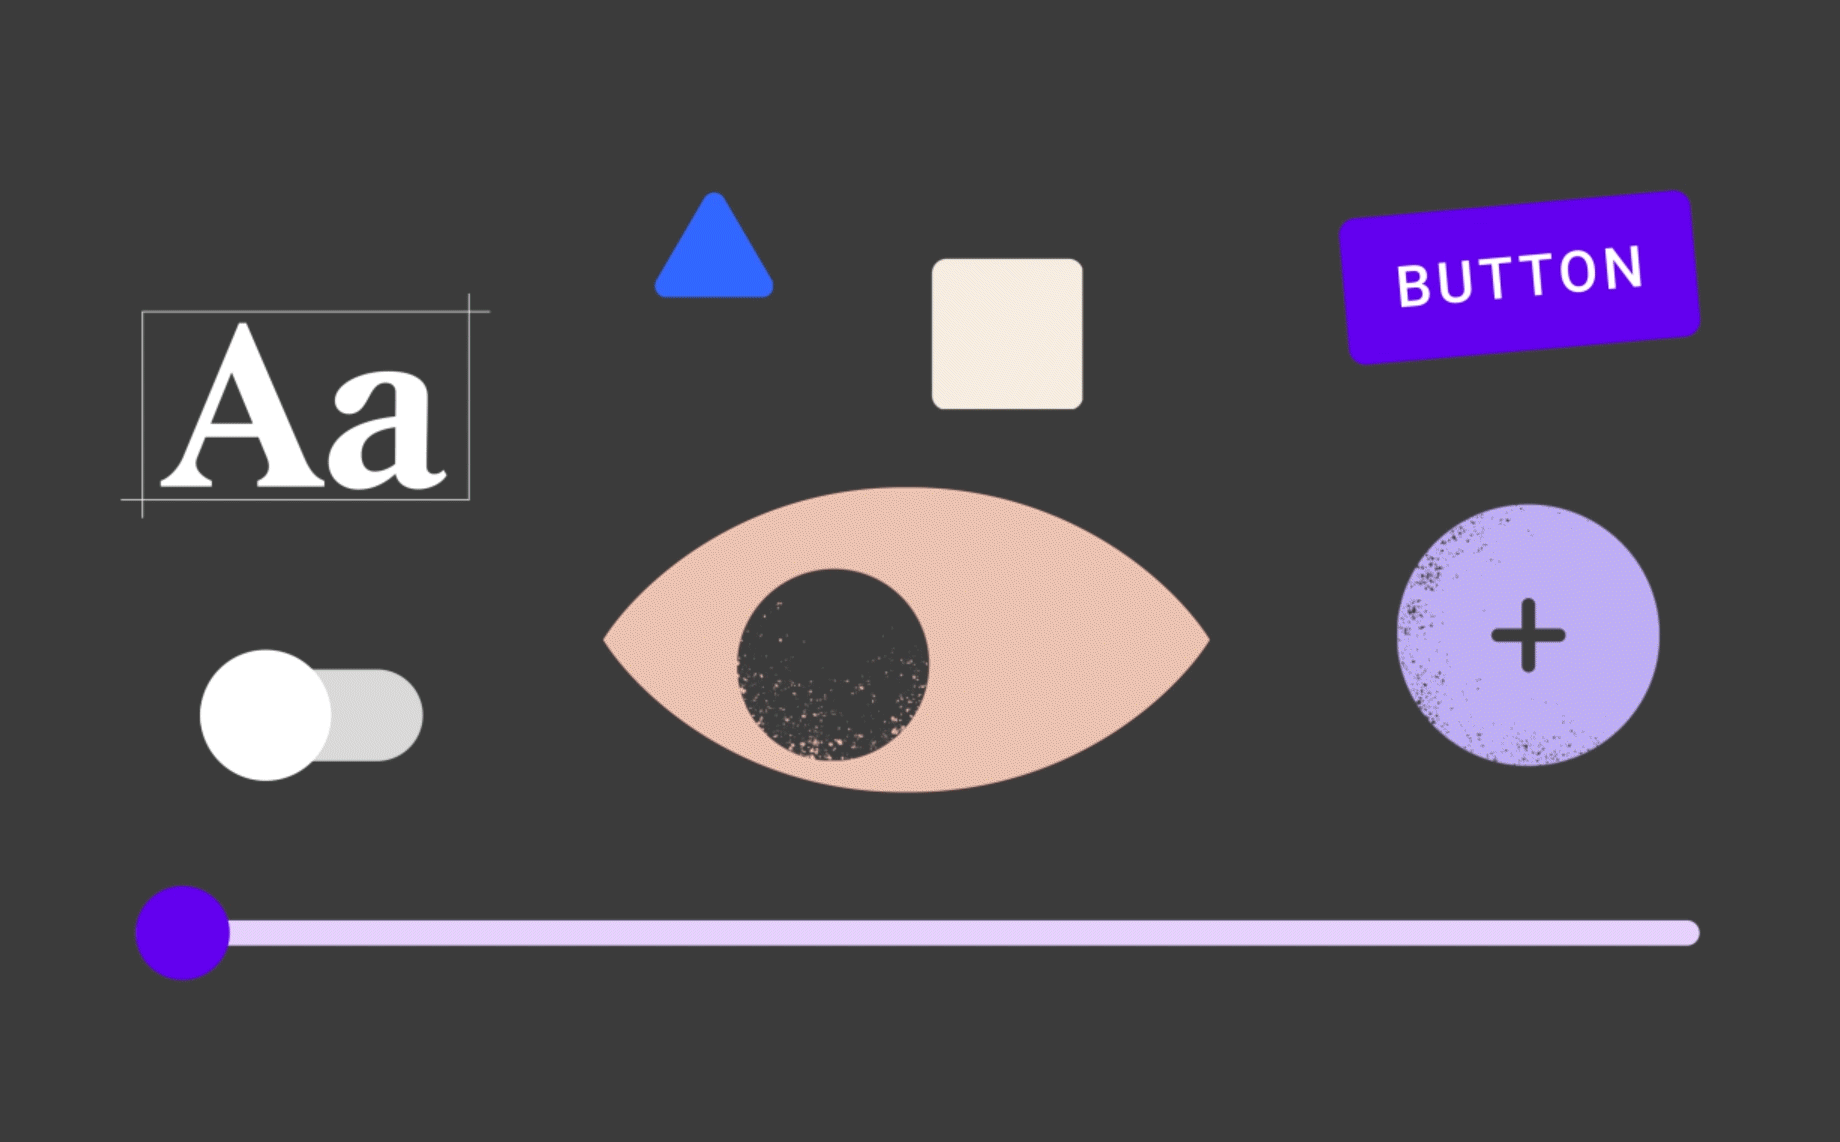  Anima 5 brings functioning Material Design to Figma and Adobe XD